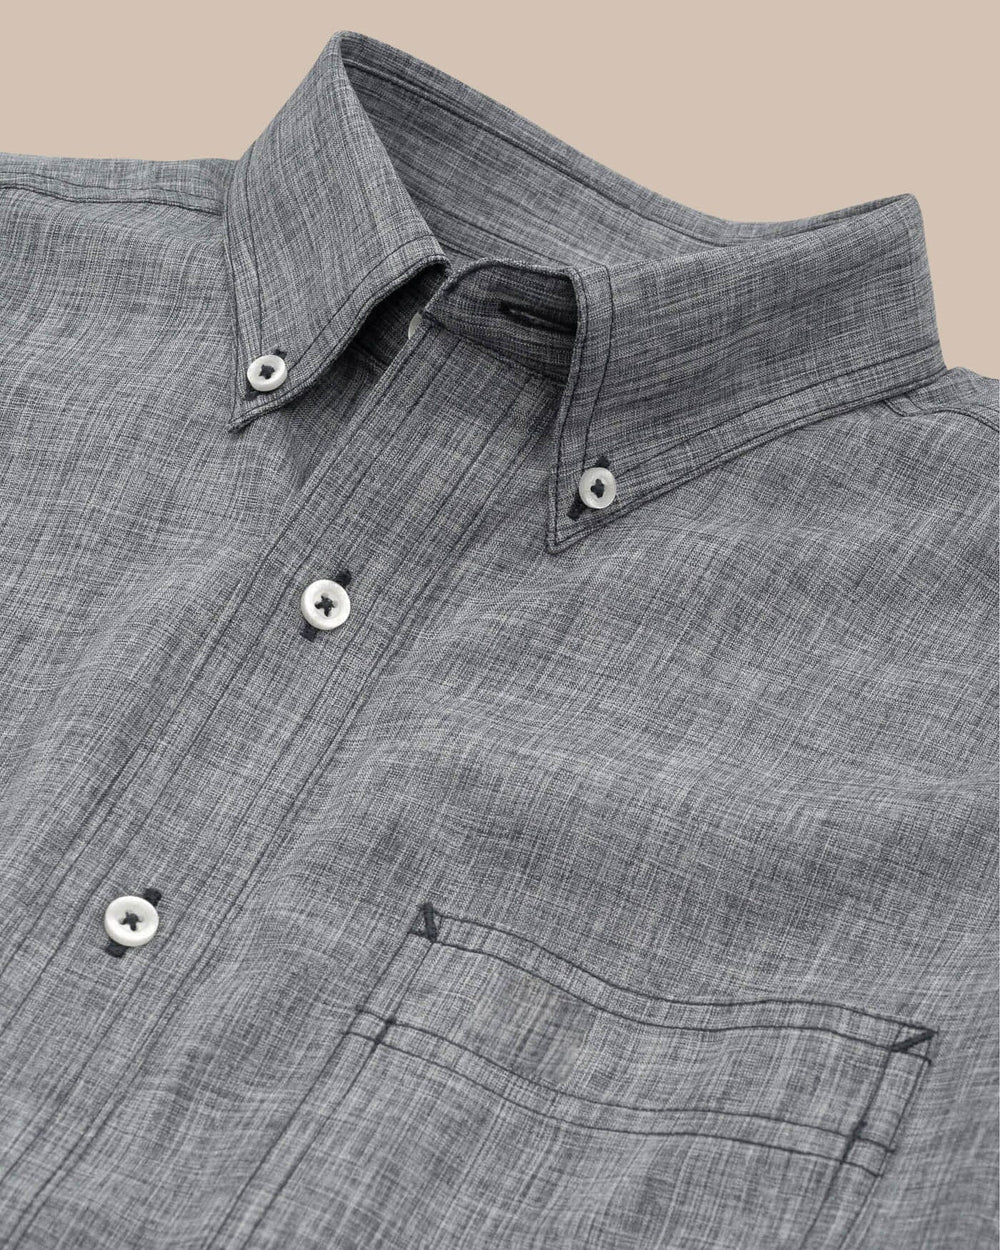 The detail view of the Southern Tide Short Sleeve Dock Shirt by Southern Tide - Polarized Grey